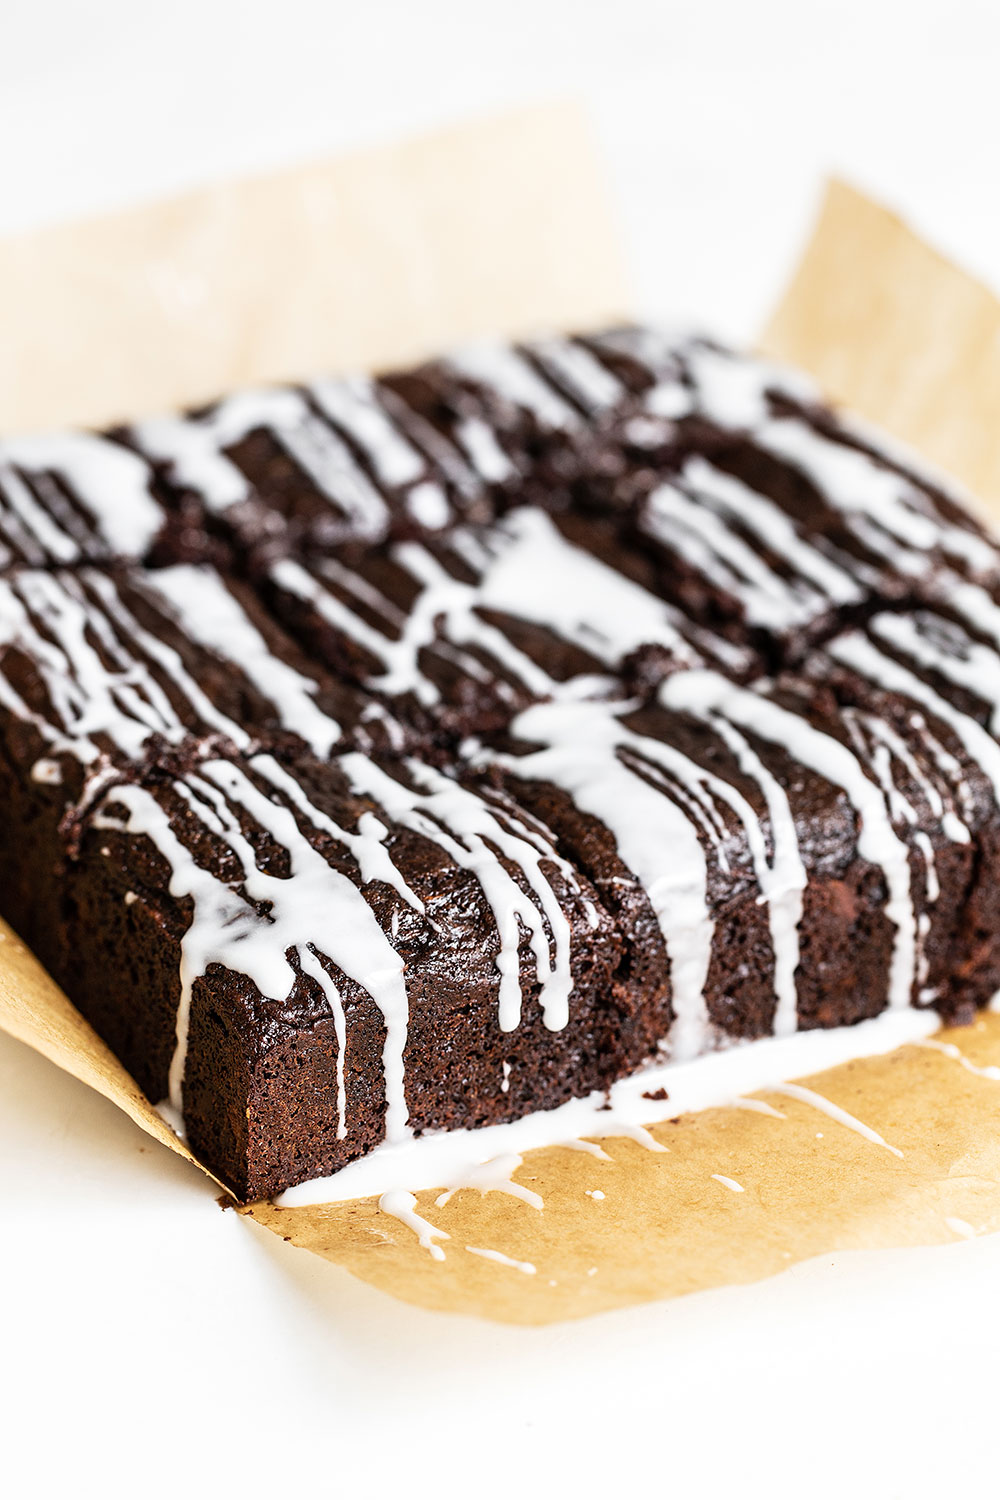 Zucchini Cake with Chocolate and a simple icing on top